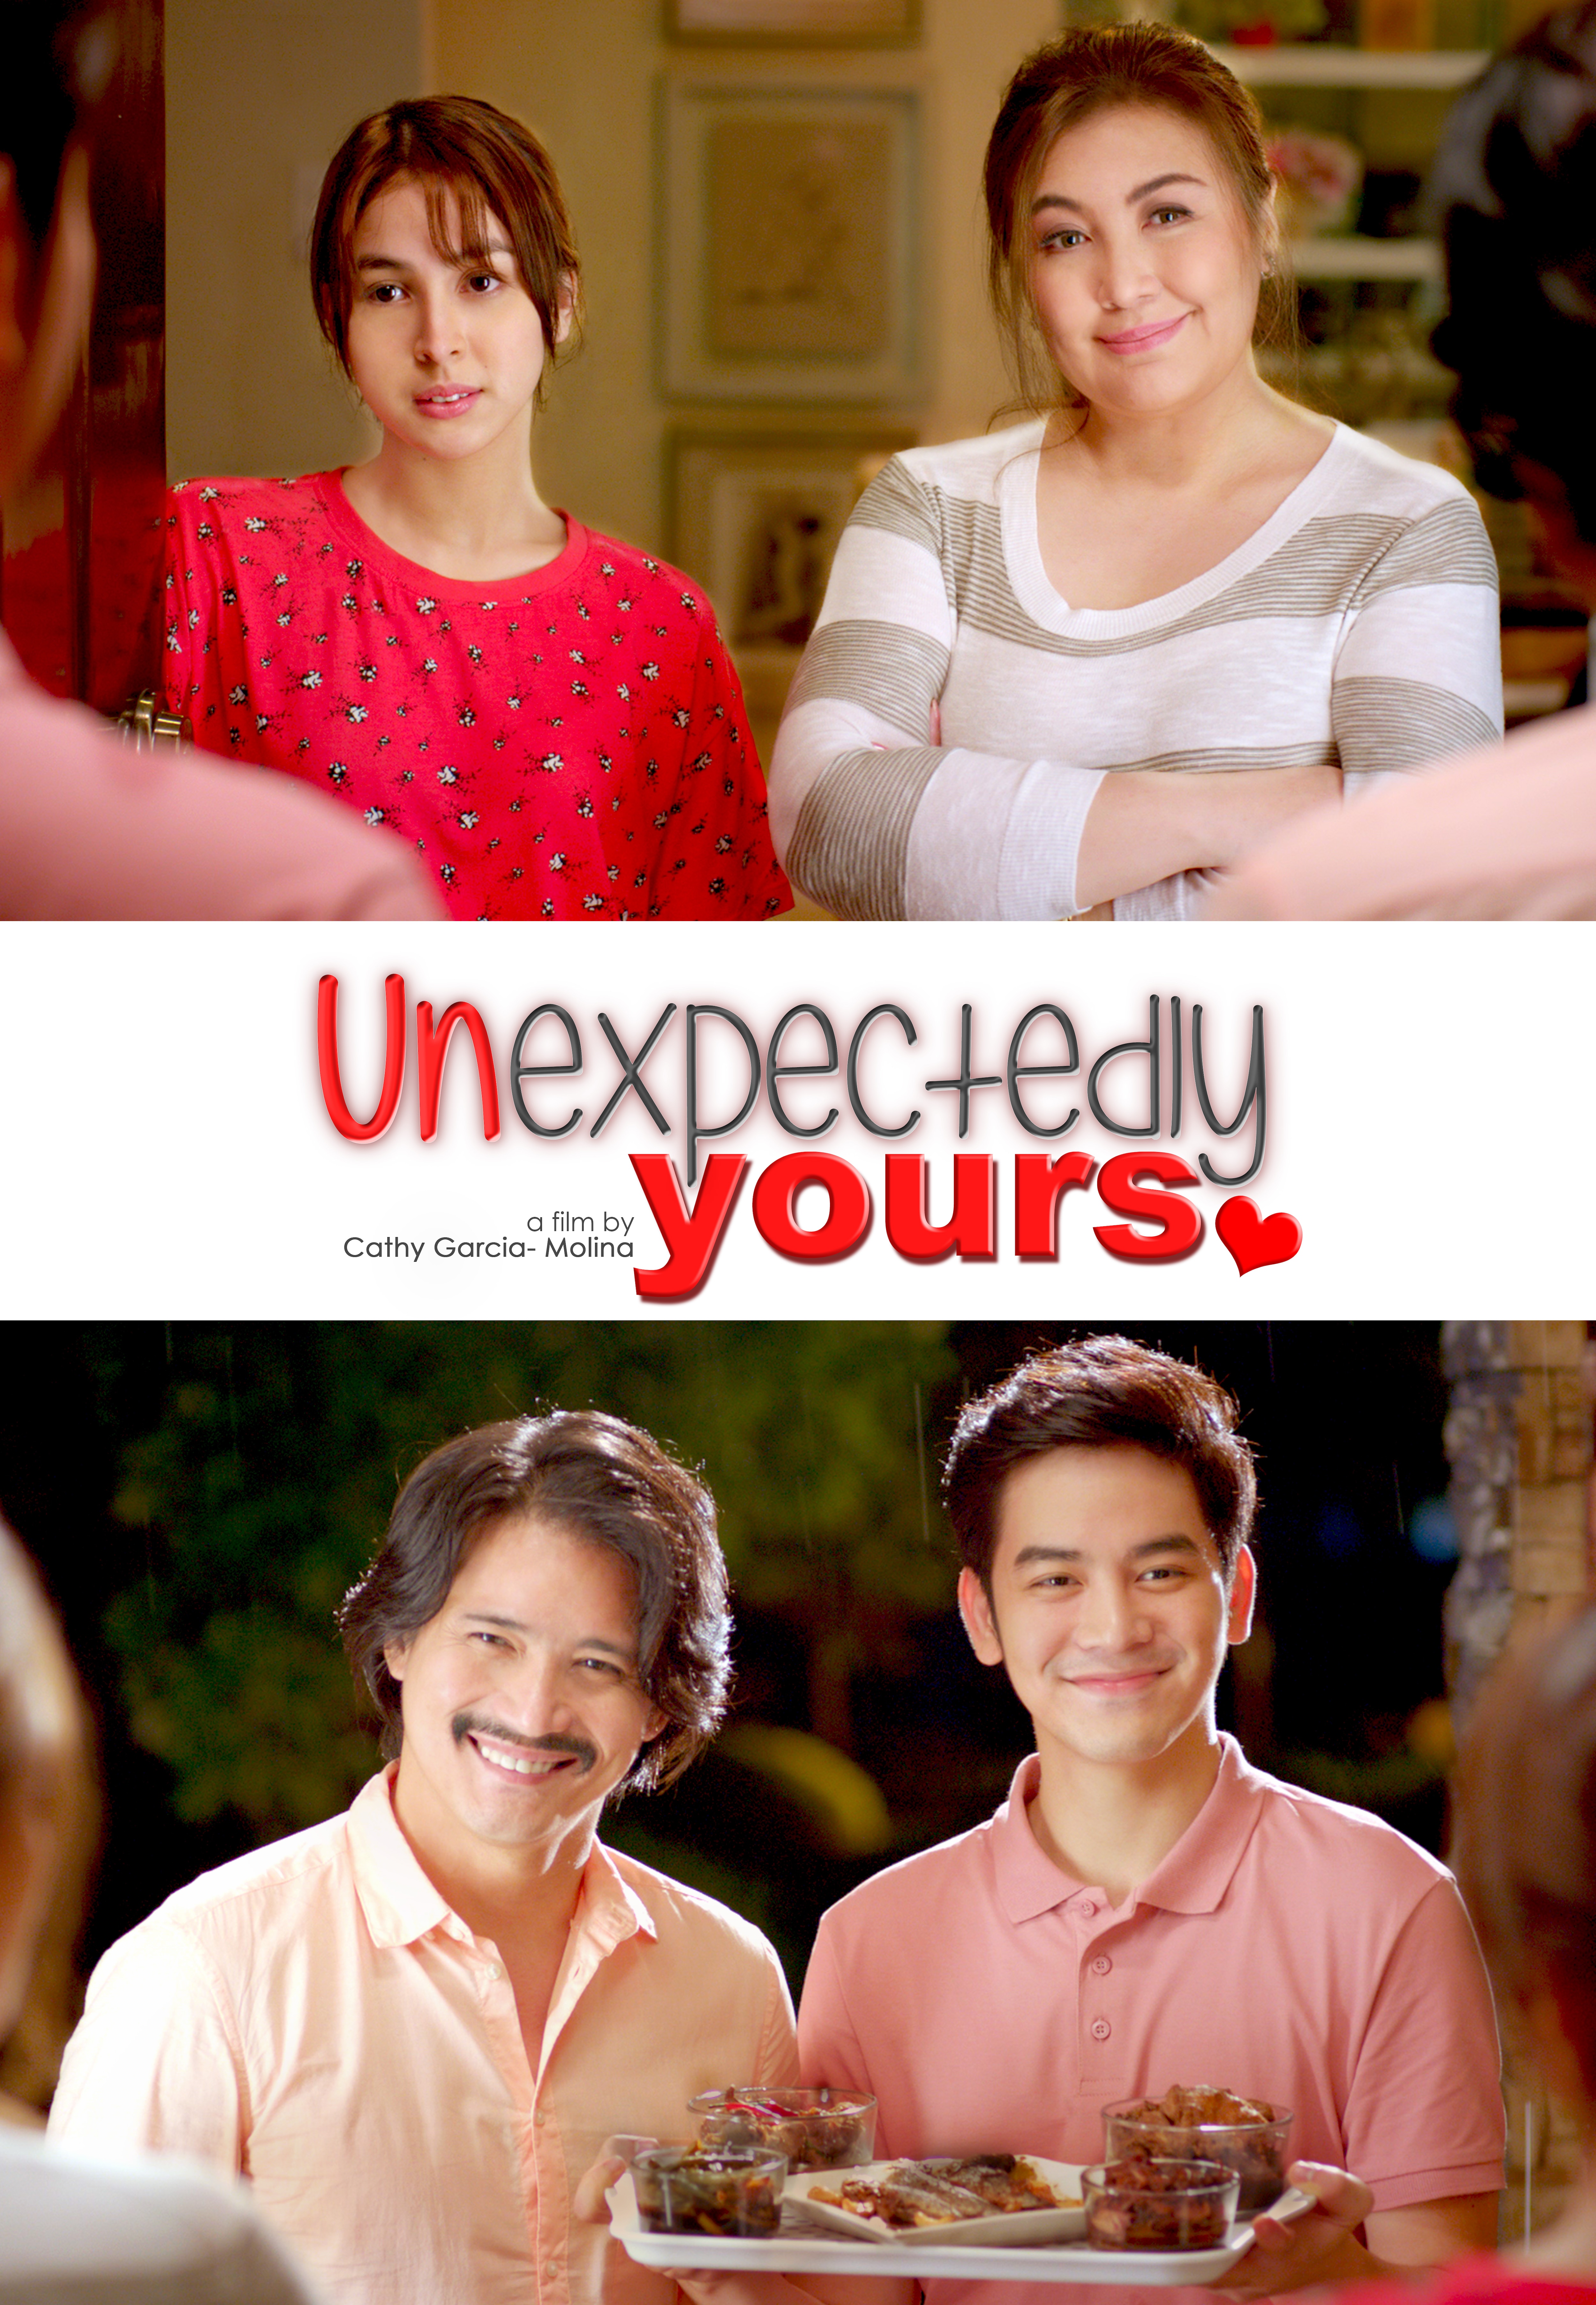 https://data-corporate.abs-cbn.com/corp/medialibrary/dotcom/isd_cast/298x442/movie-unexpectedly-yours-poster-clean.jpg?ext=.jpg